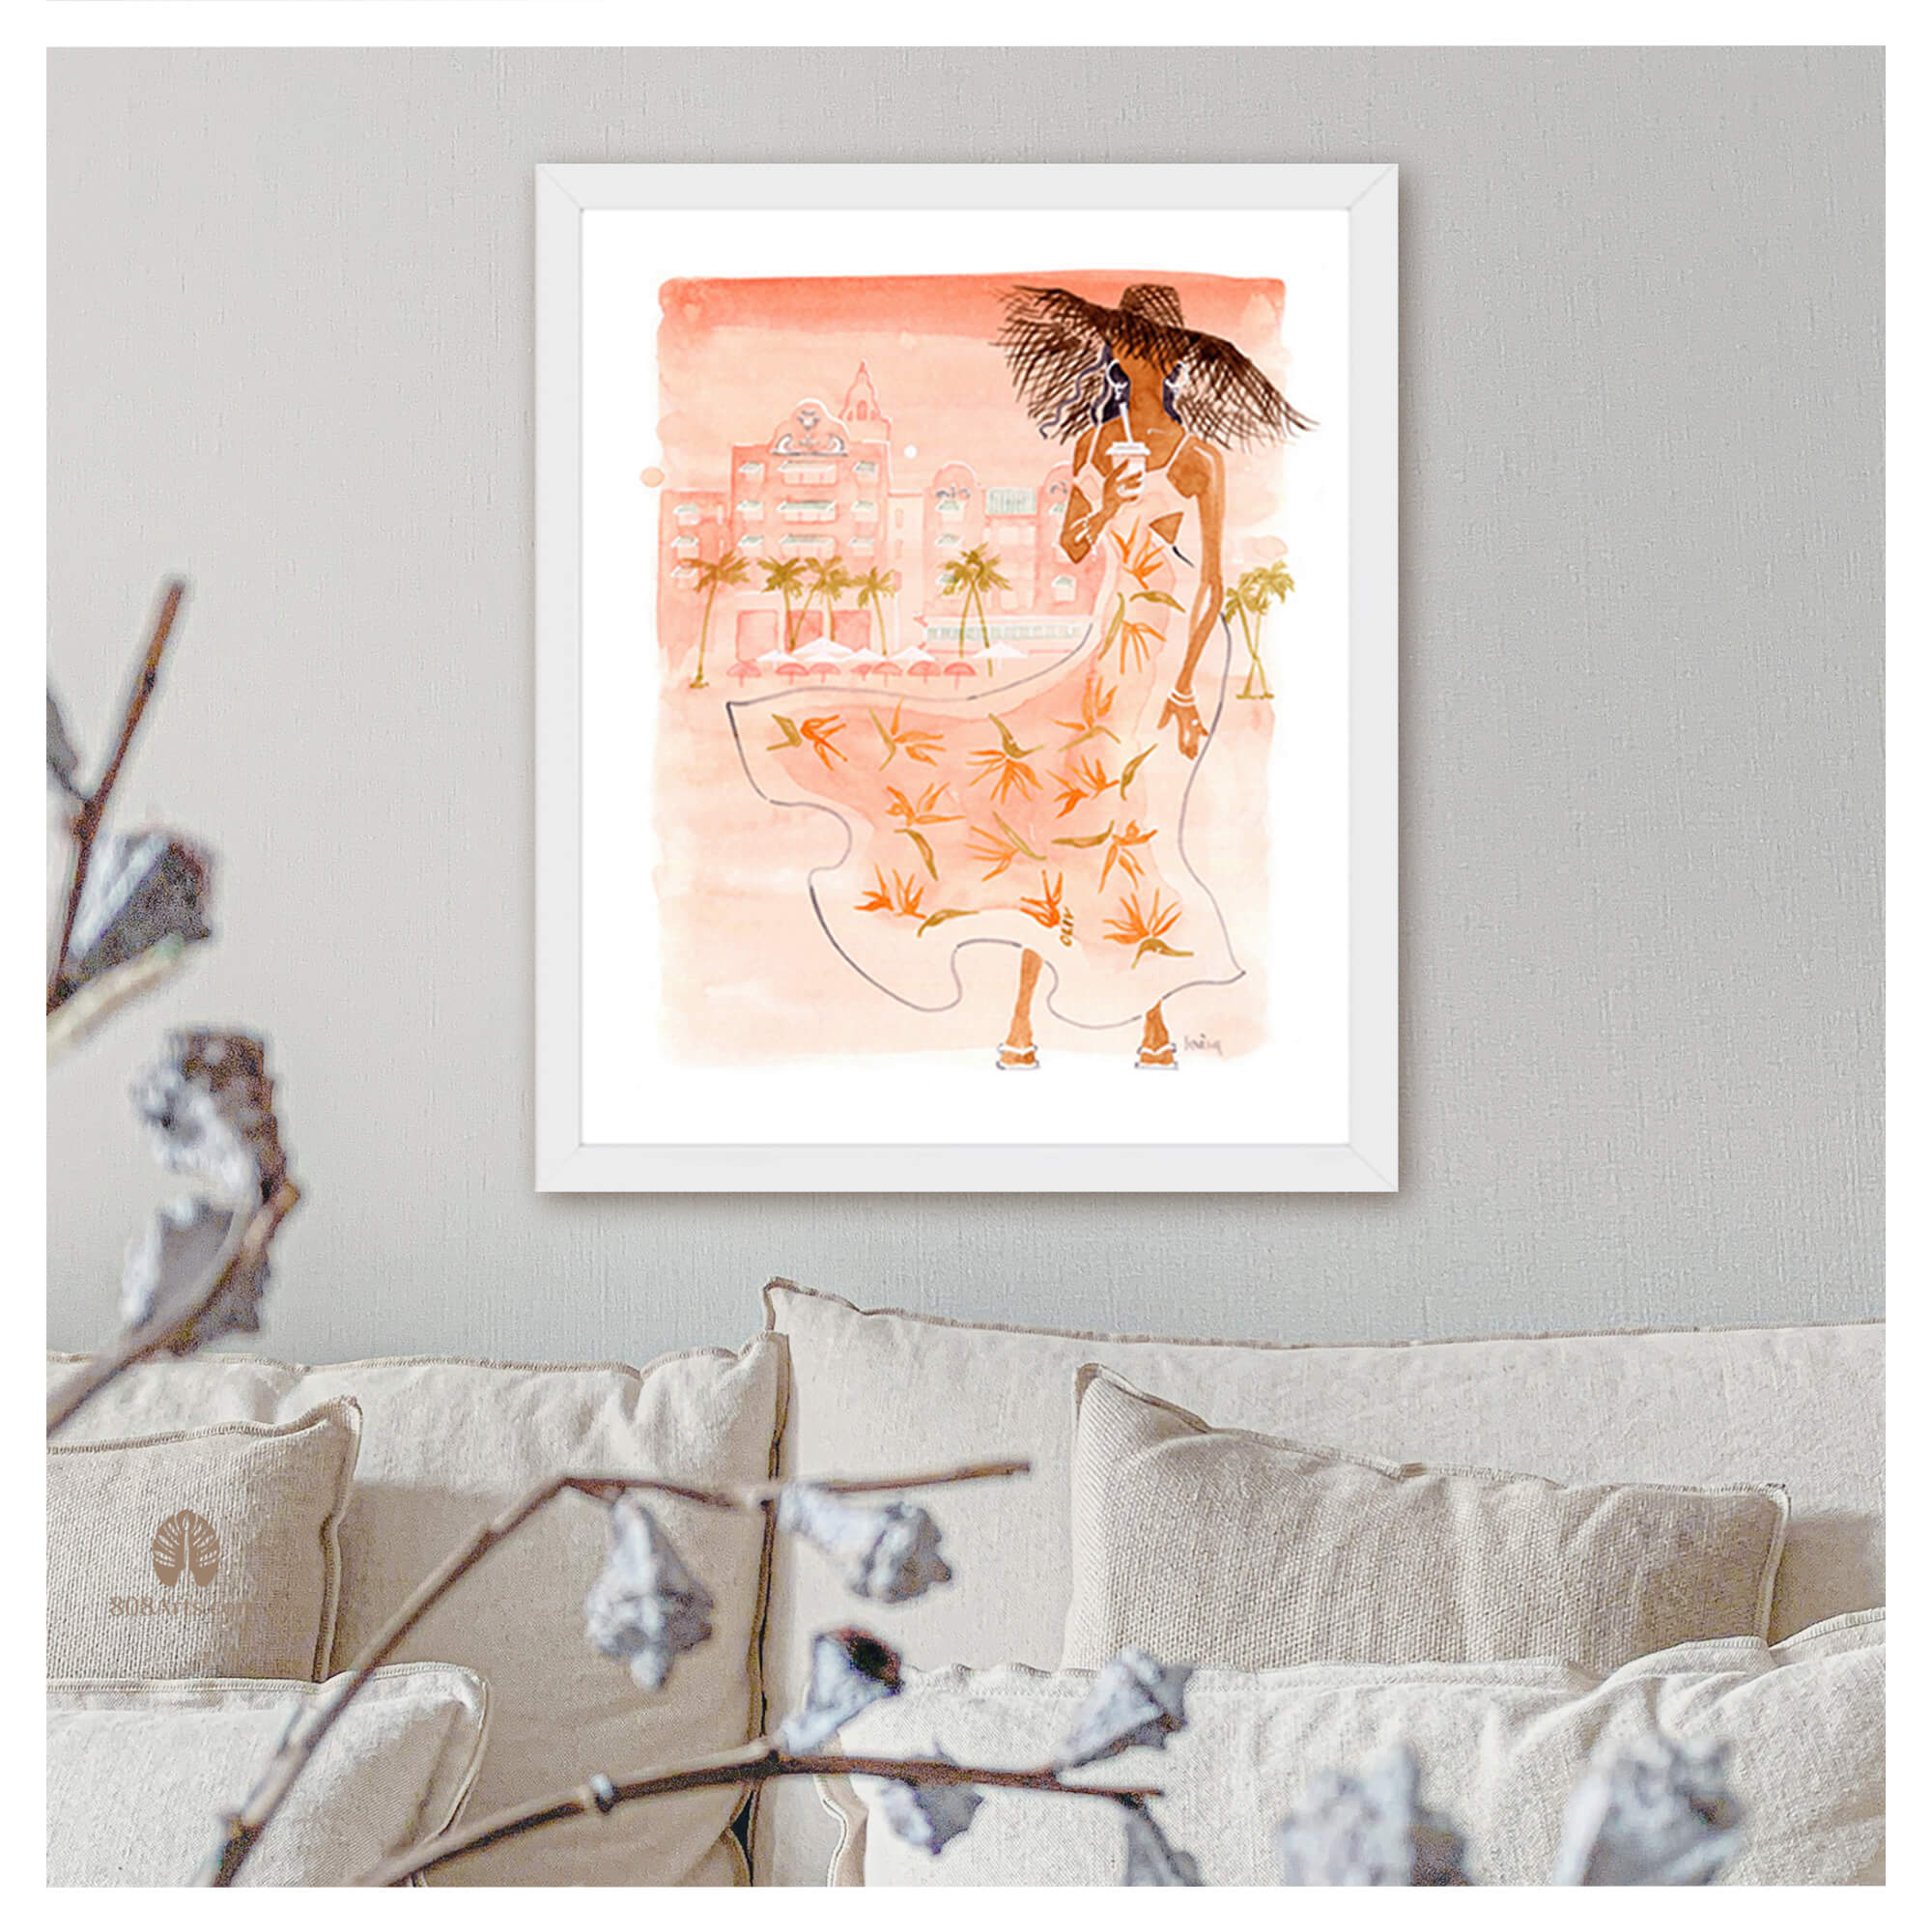 Framed paper giclée print of a watercolor artwork featuring a fashionable woman in front of Royal Hawaiian Hotel by Hawaii artist Lovisa Oliv